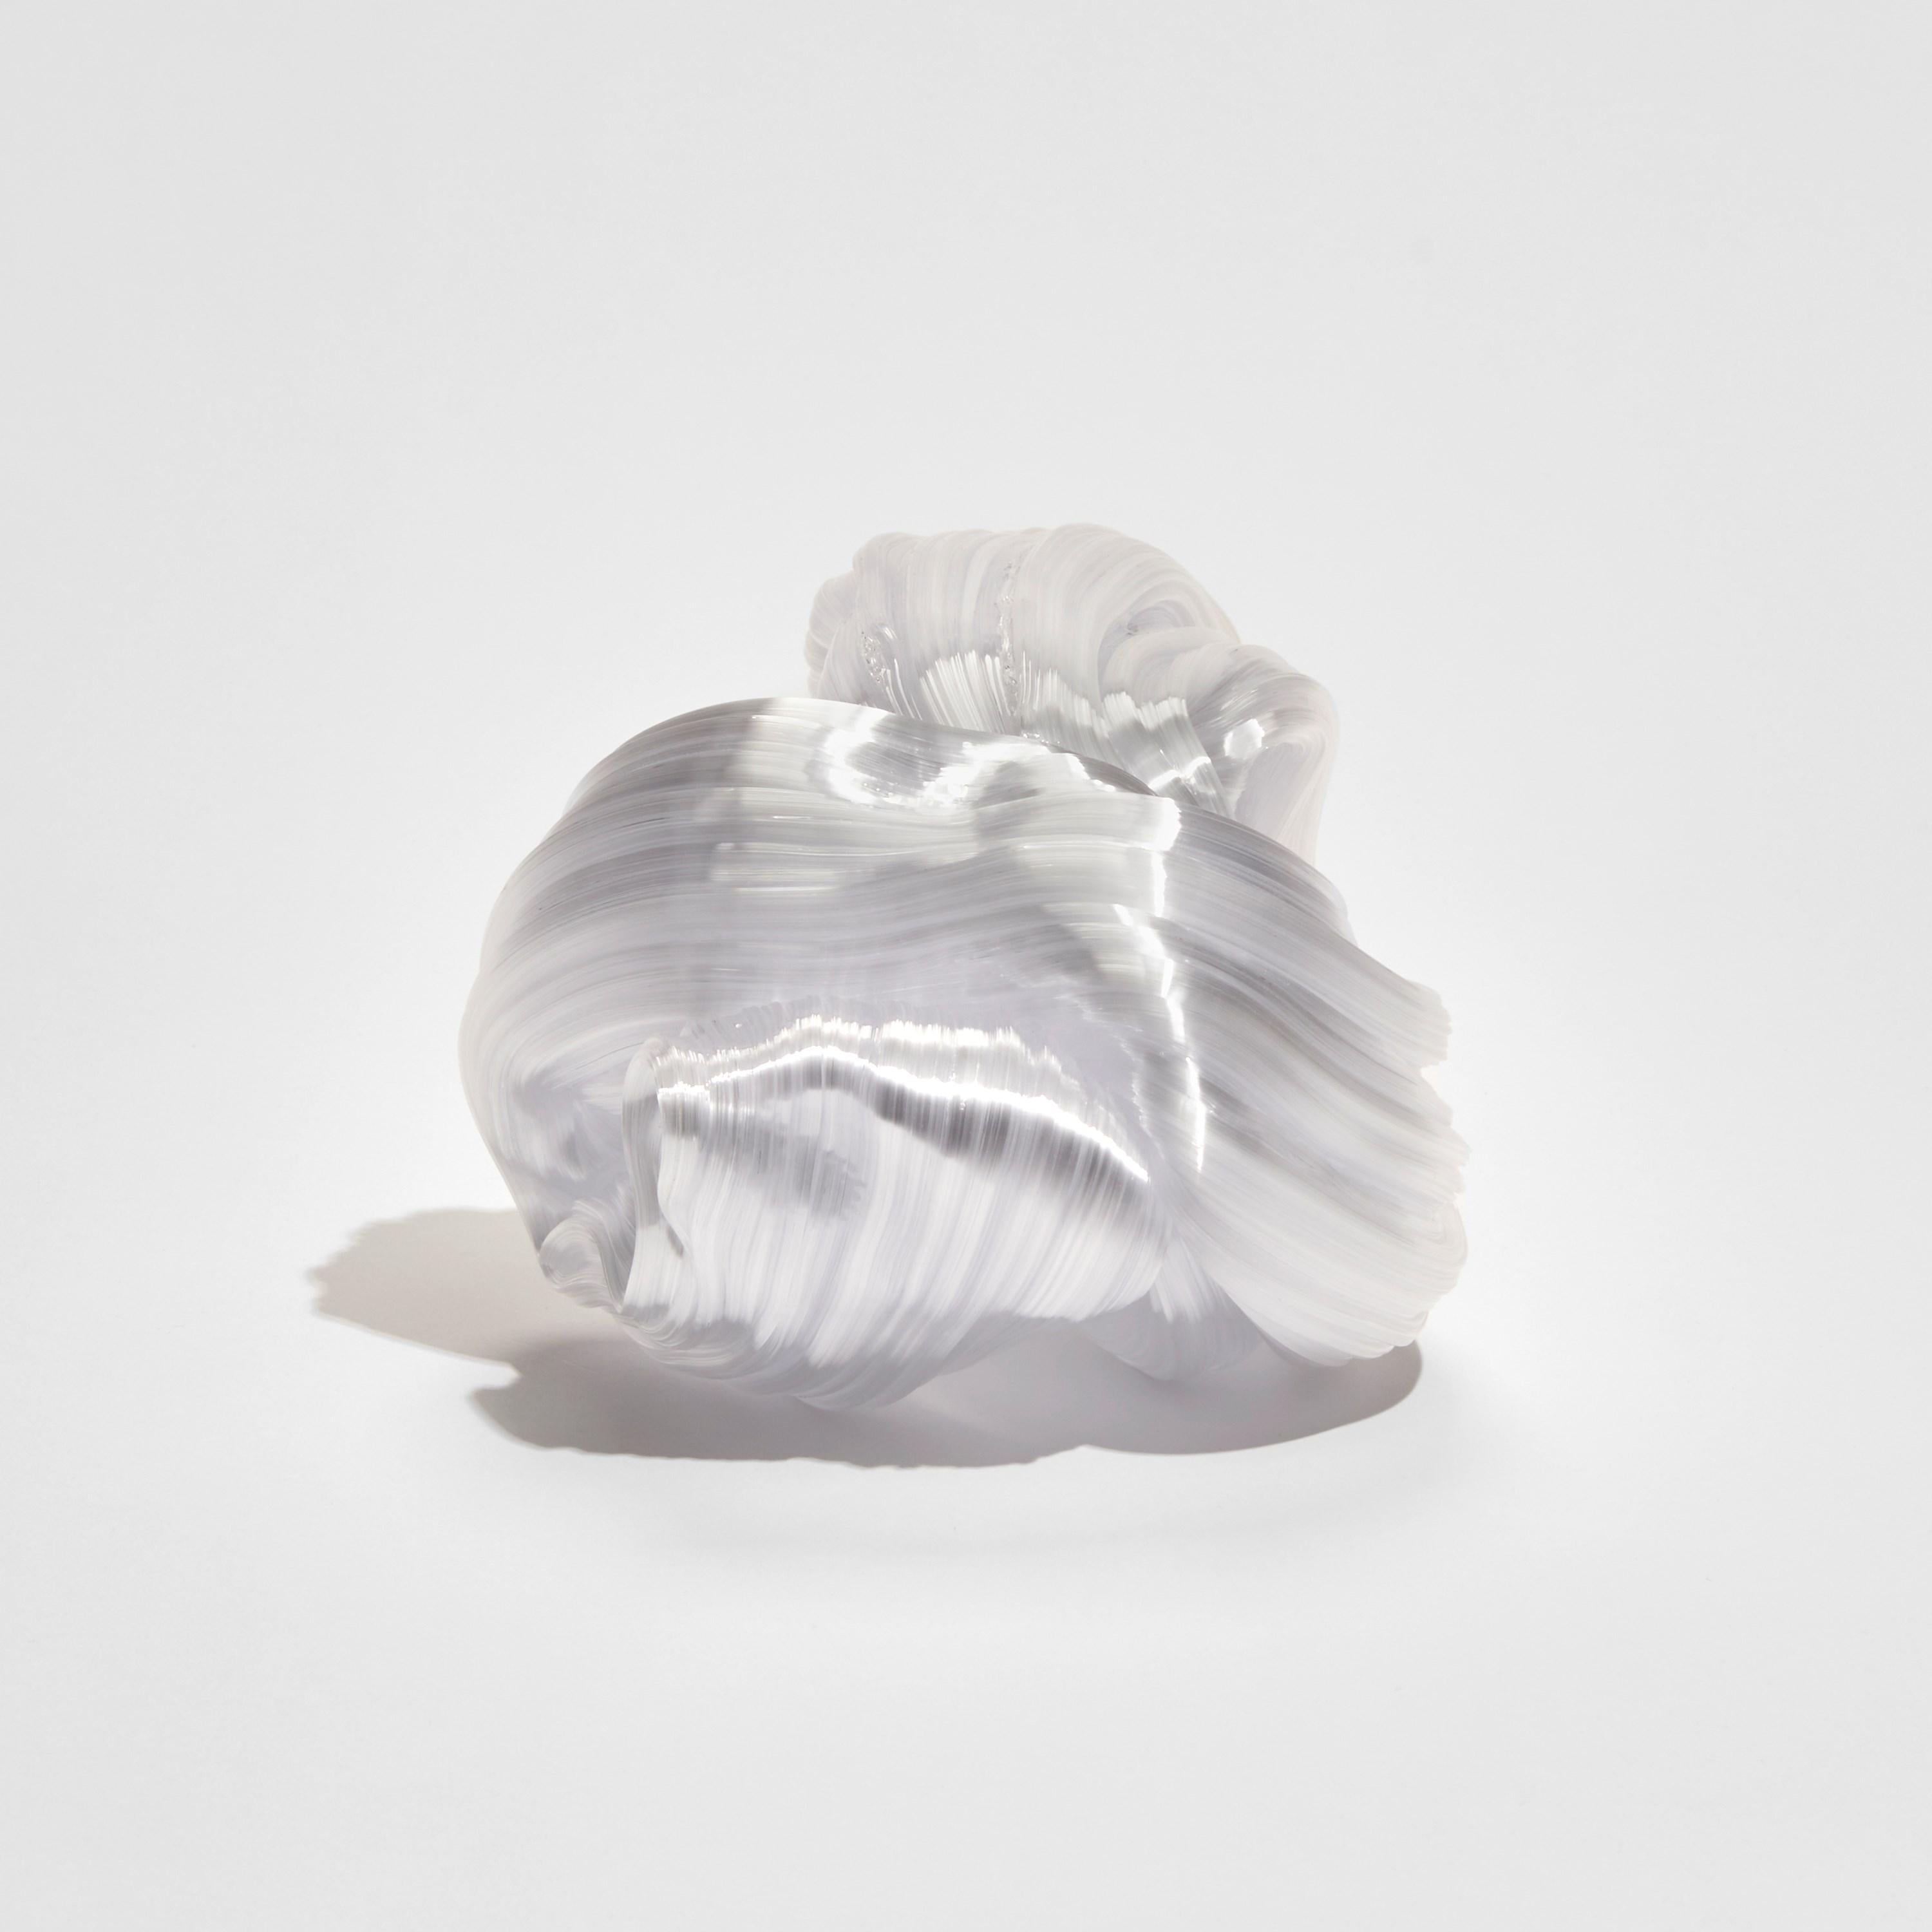 Danish  Around in White, a Unique Abstract Glass Sculpture by Maria Bang Espersen